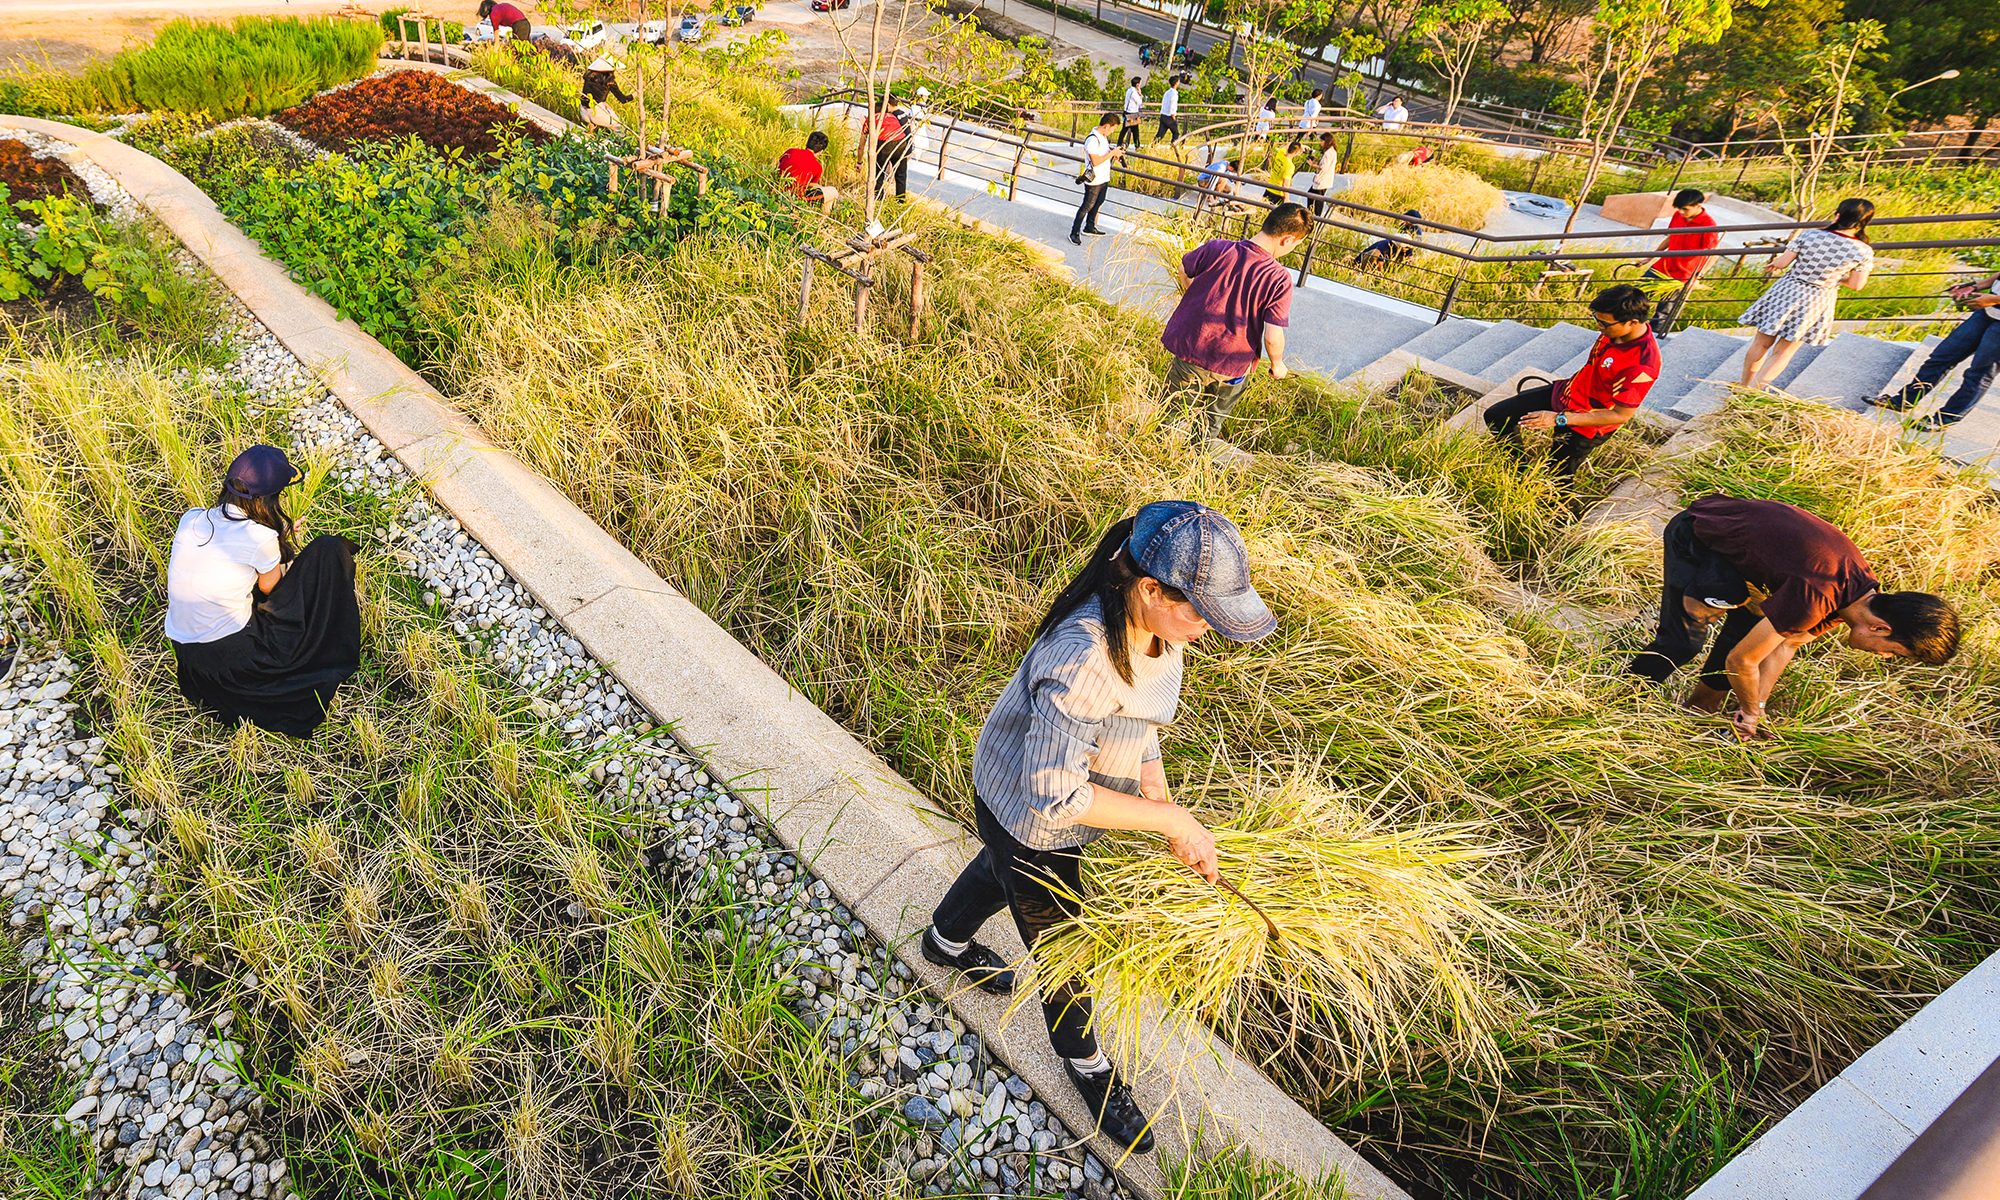 See Asia’s largest organic rooftop farm — located in busy
Bangkok 